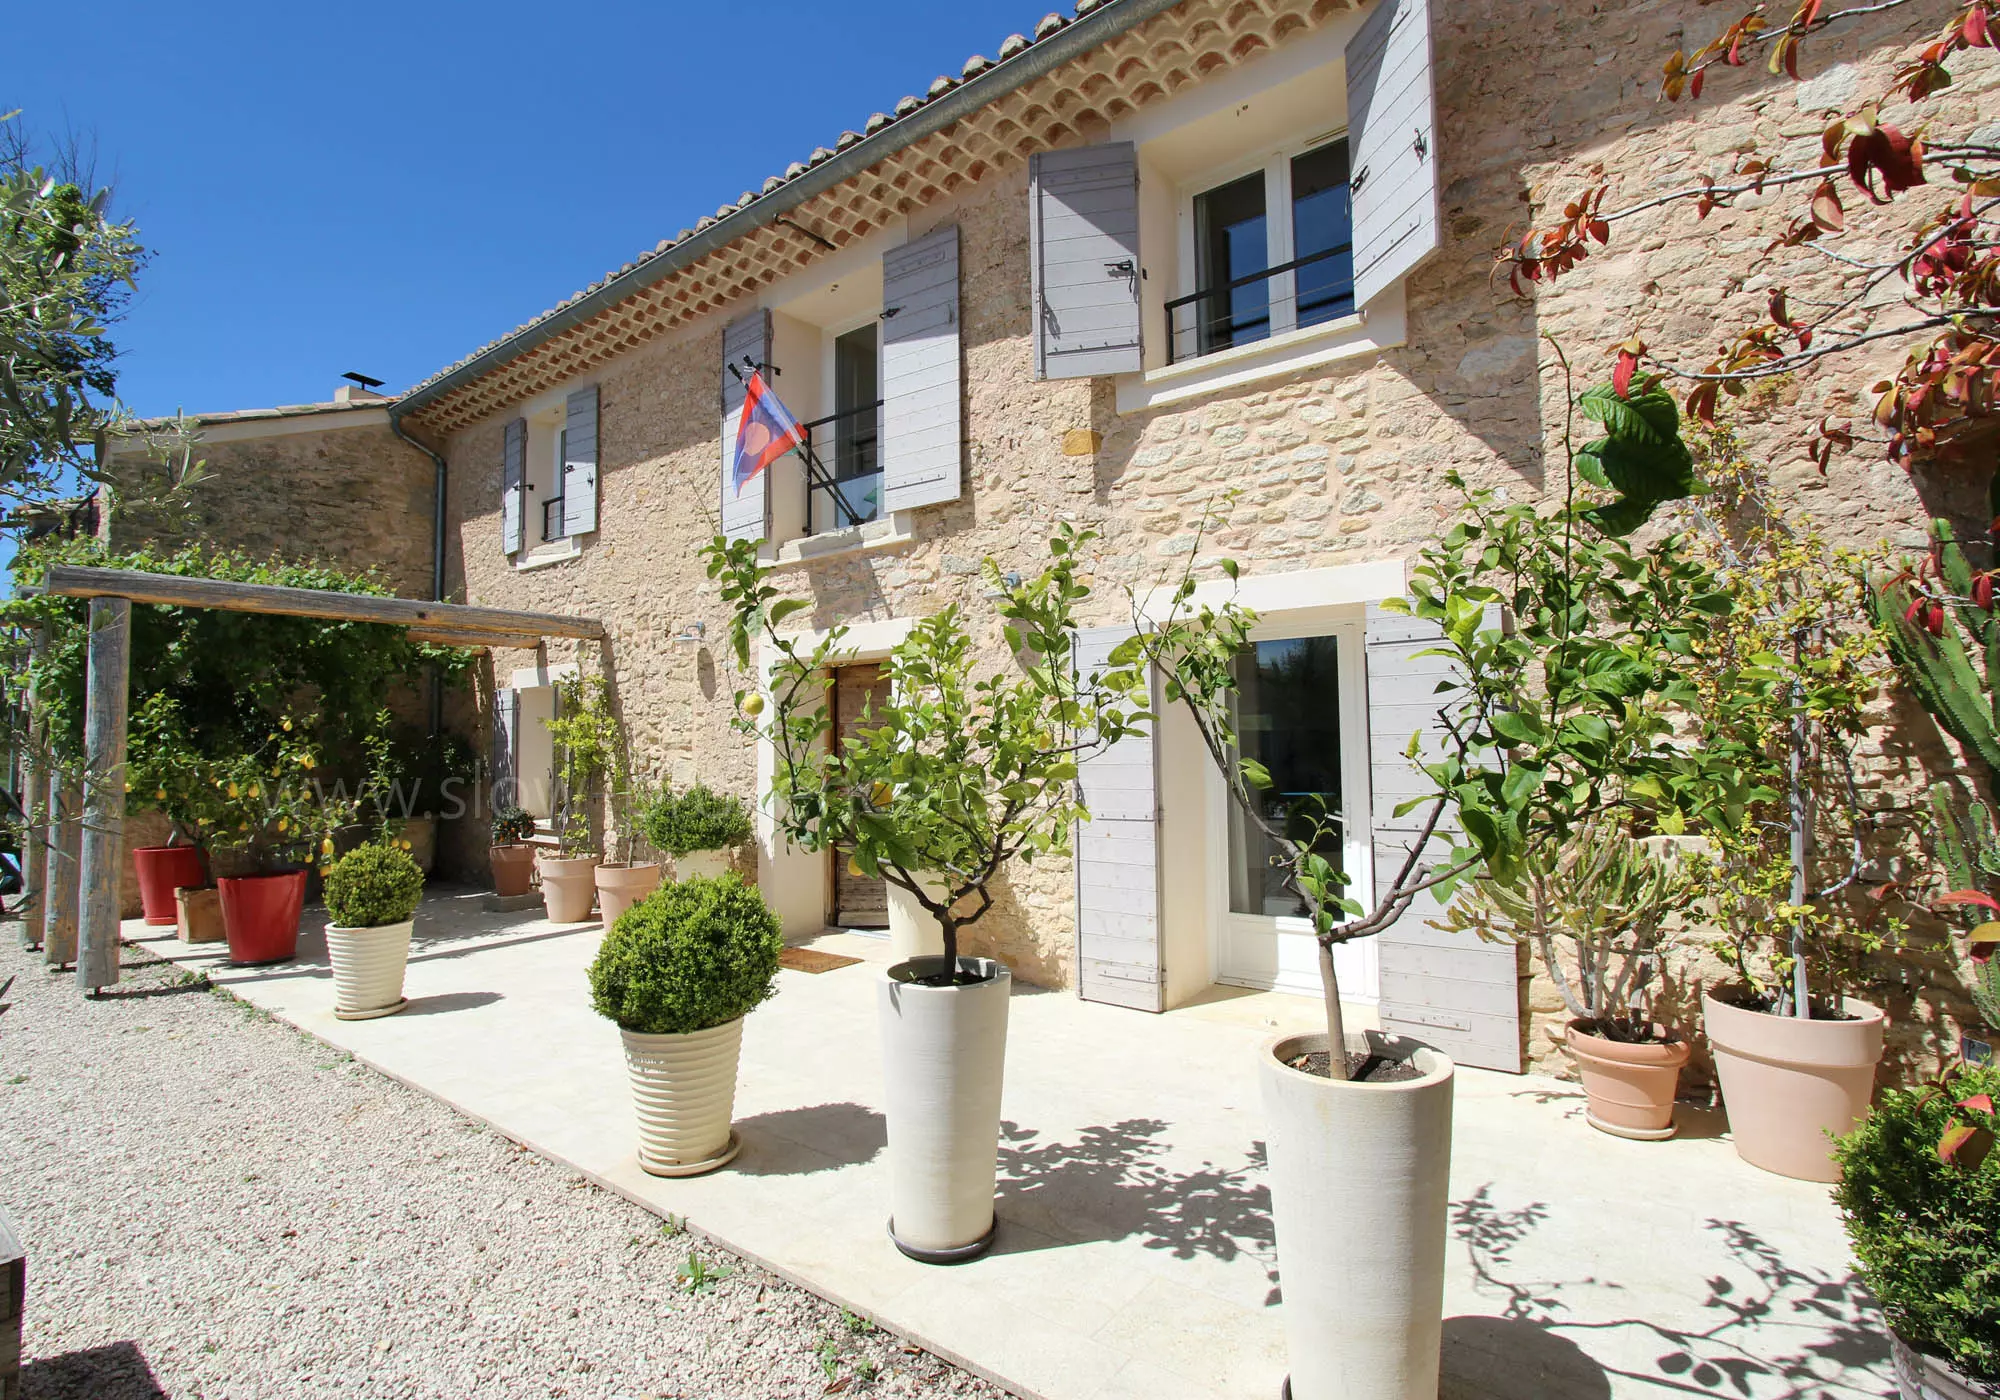 Le Petit Mas awaits you for a relaxing vacation in Provence!